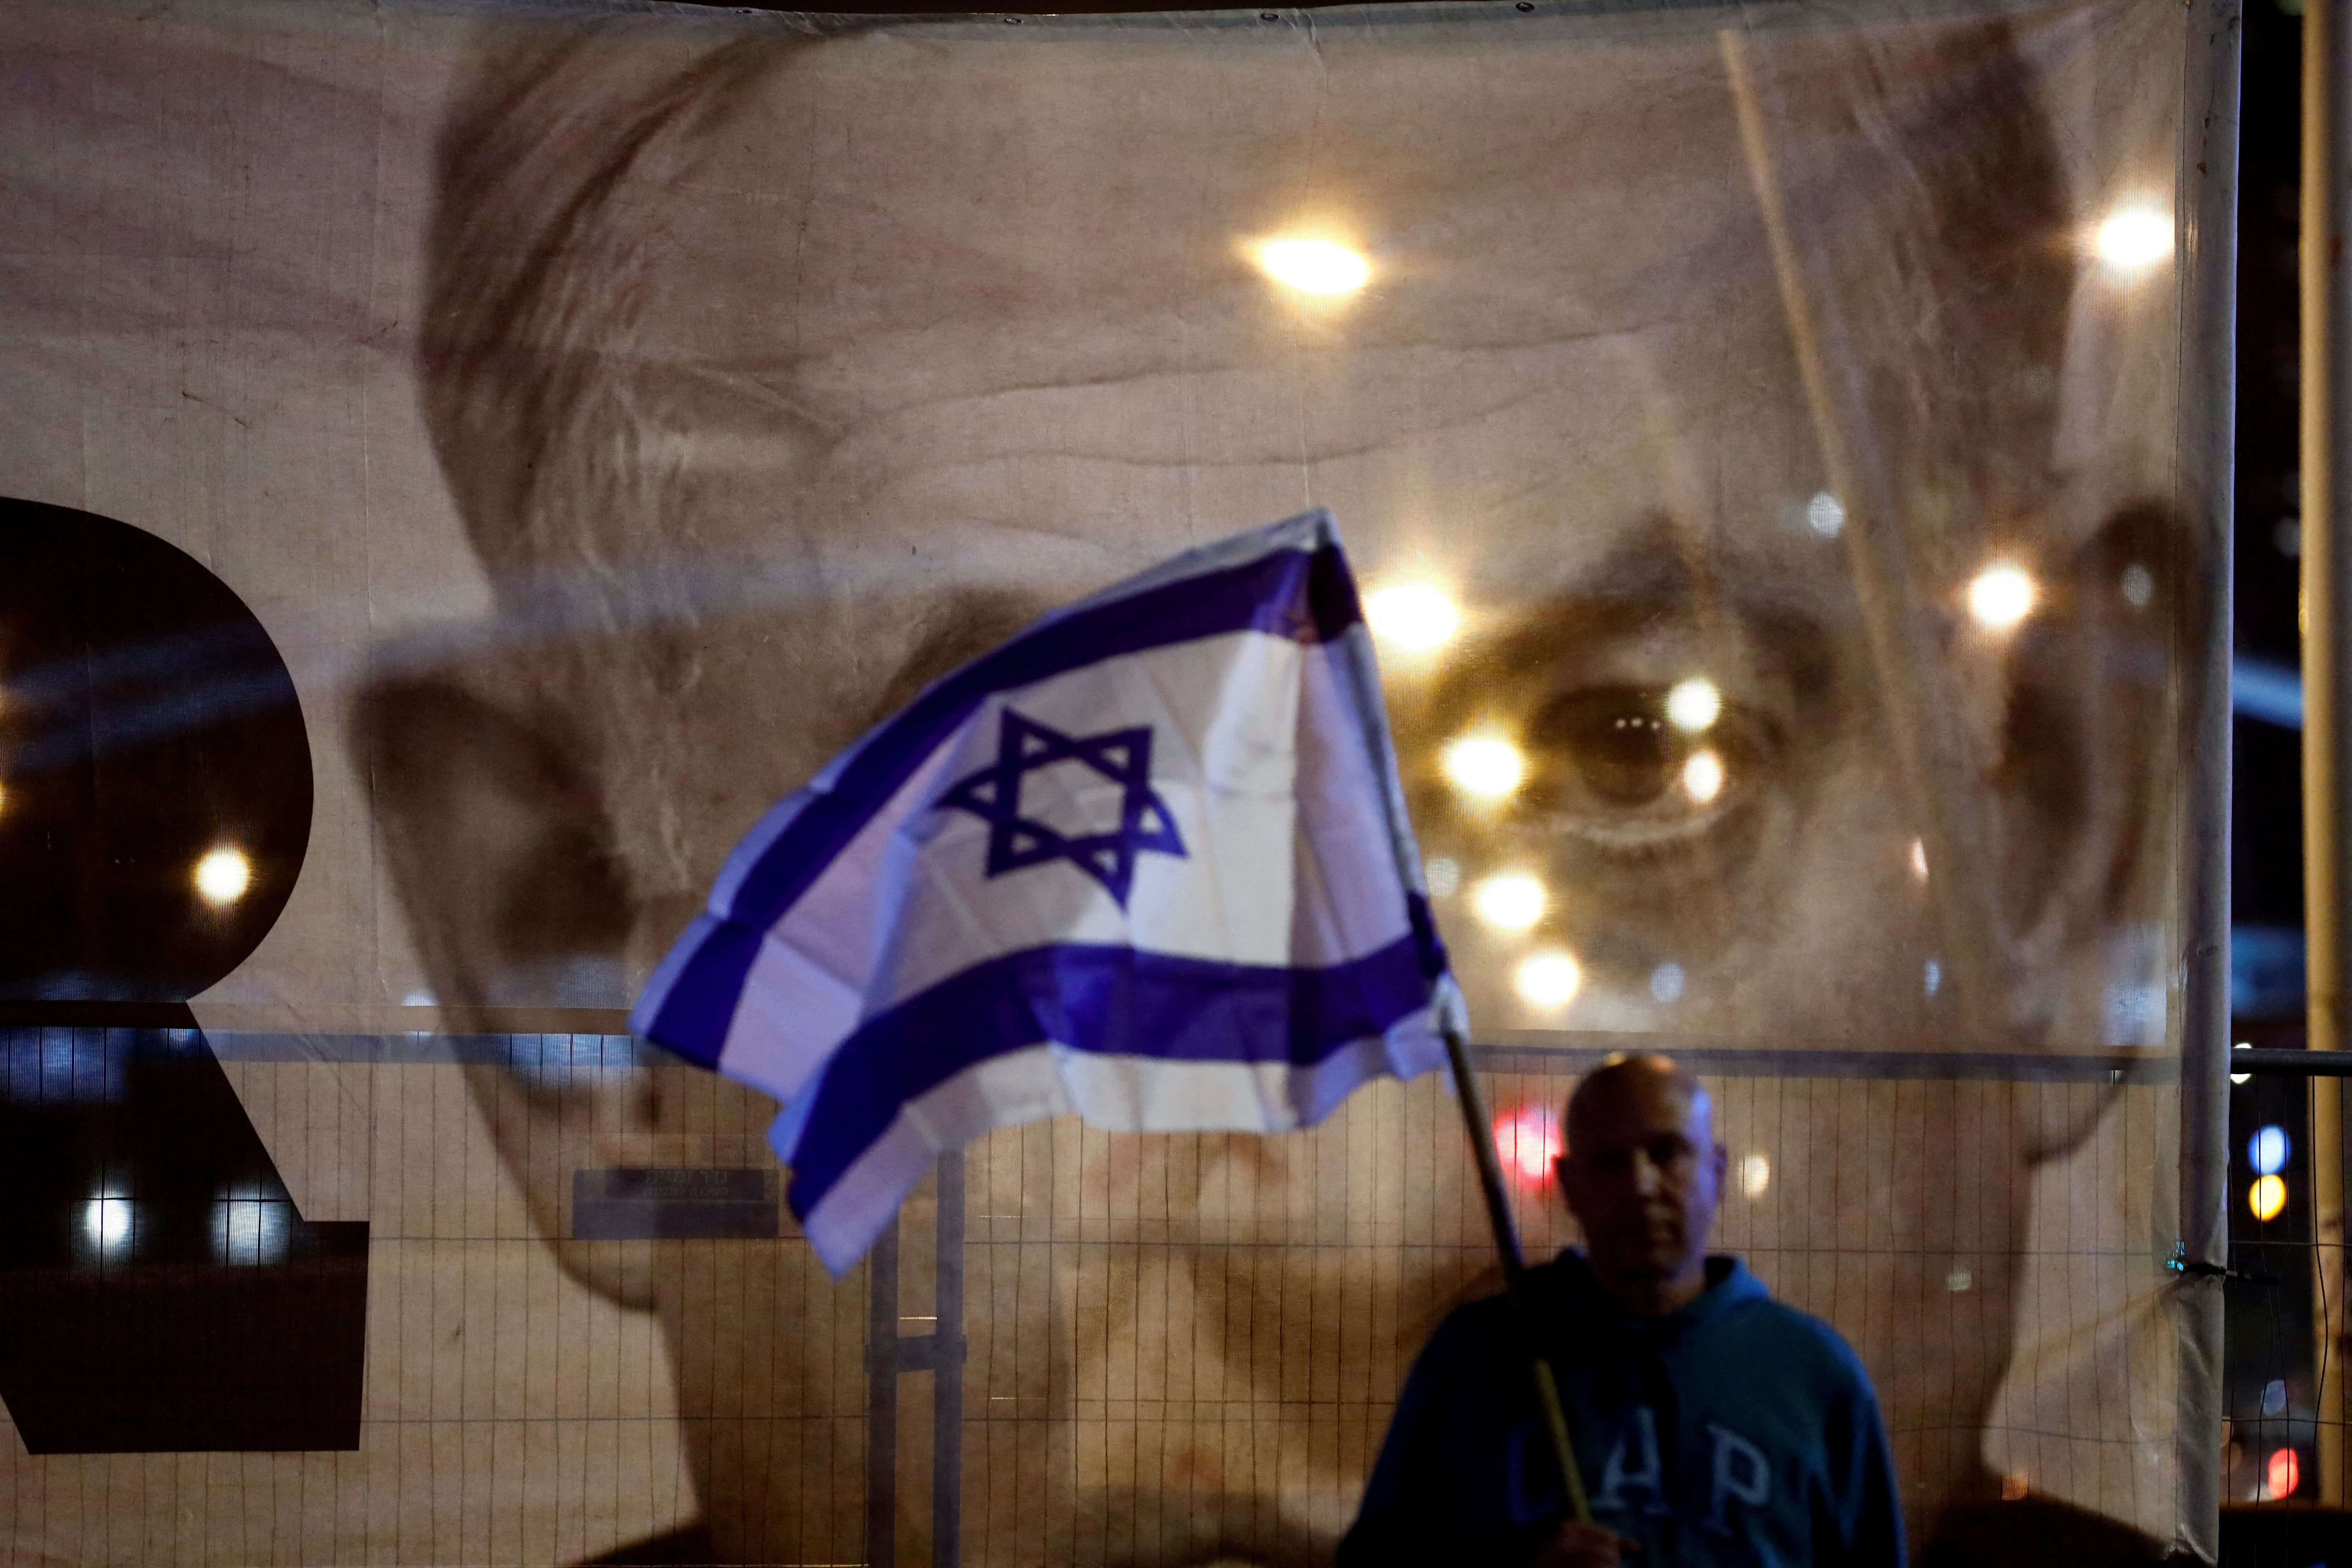 Israelis protest Prime Minister Benjamin Netanyahu's new right-wing coalition and its proposed judicial reforms, in Tel Aviv